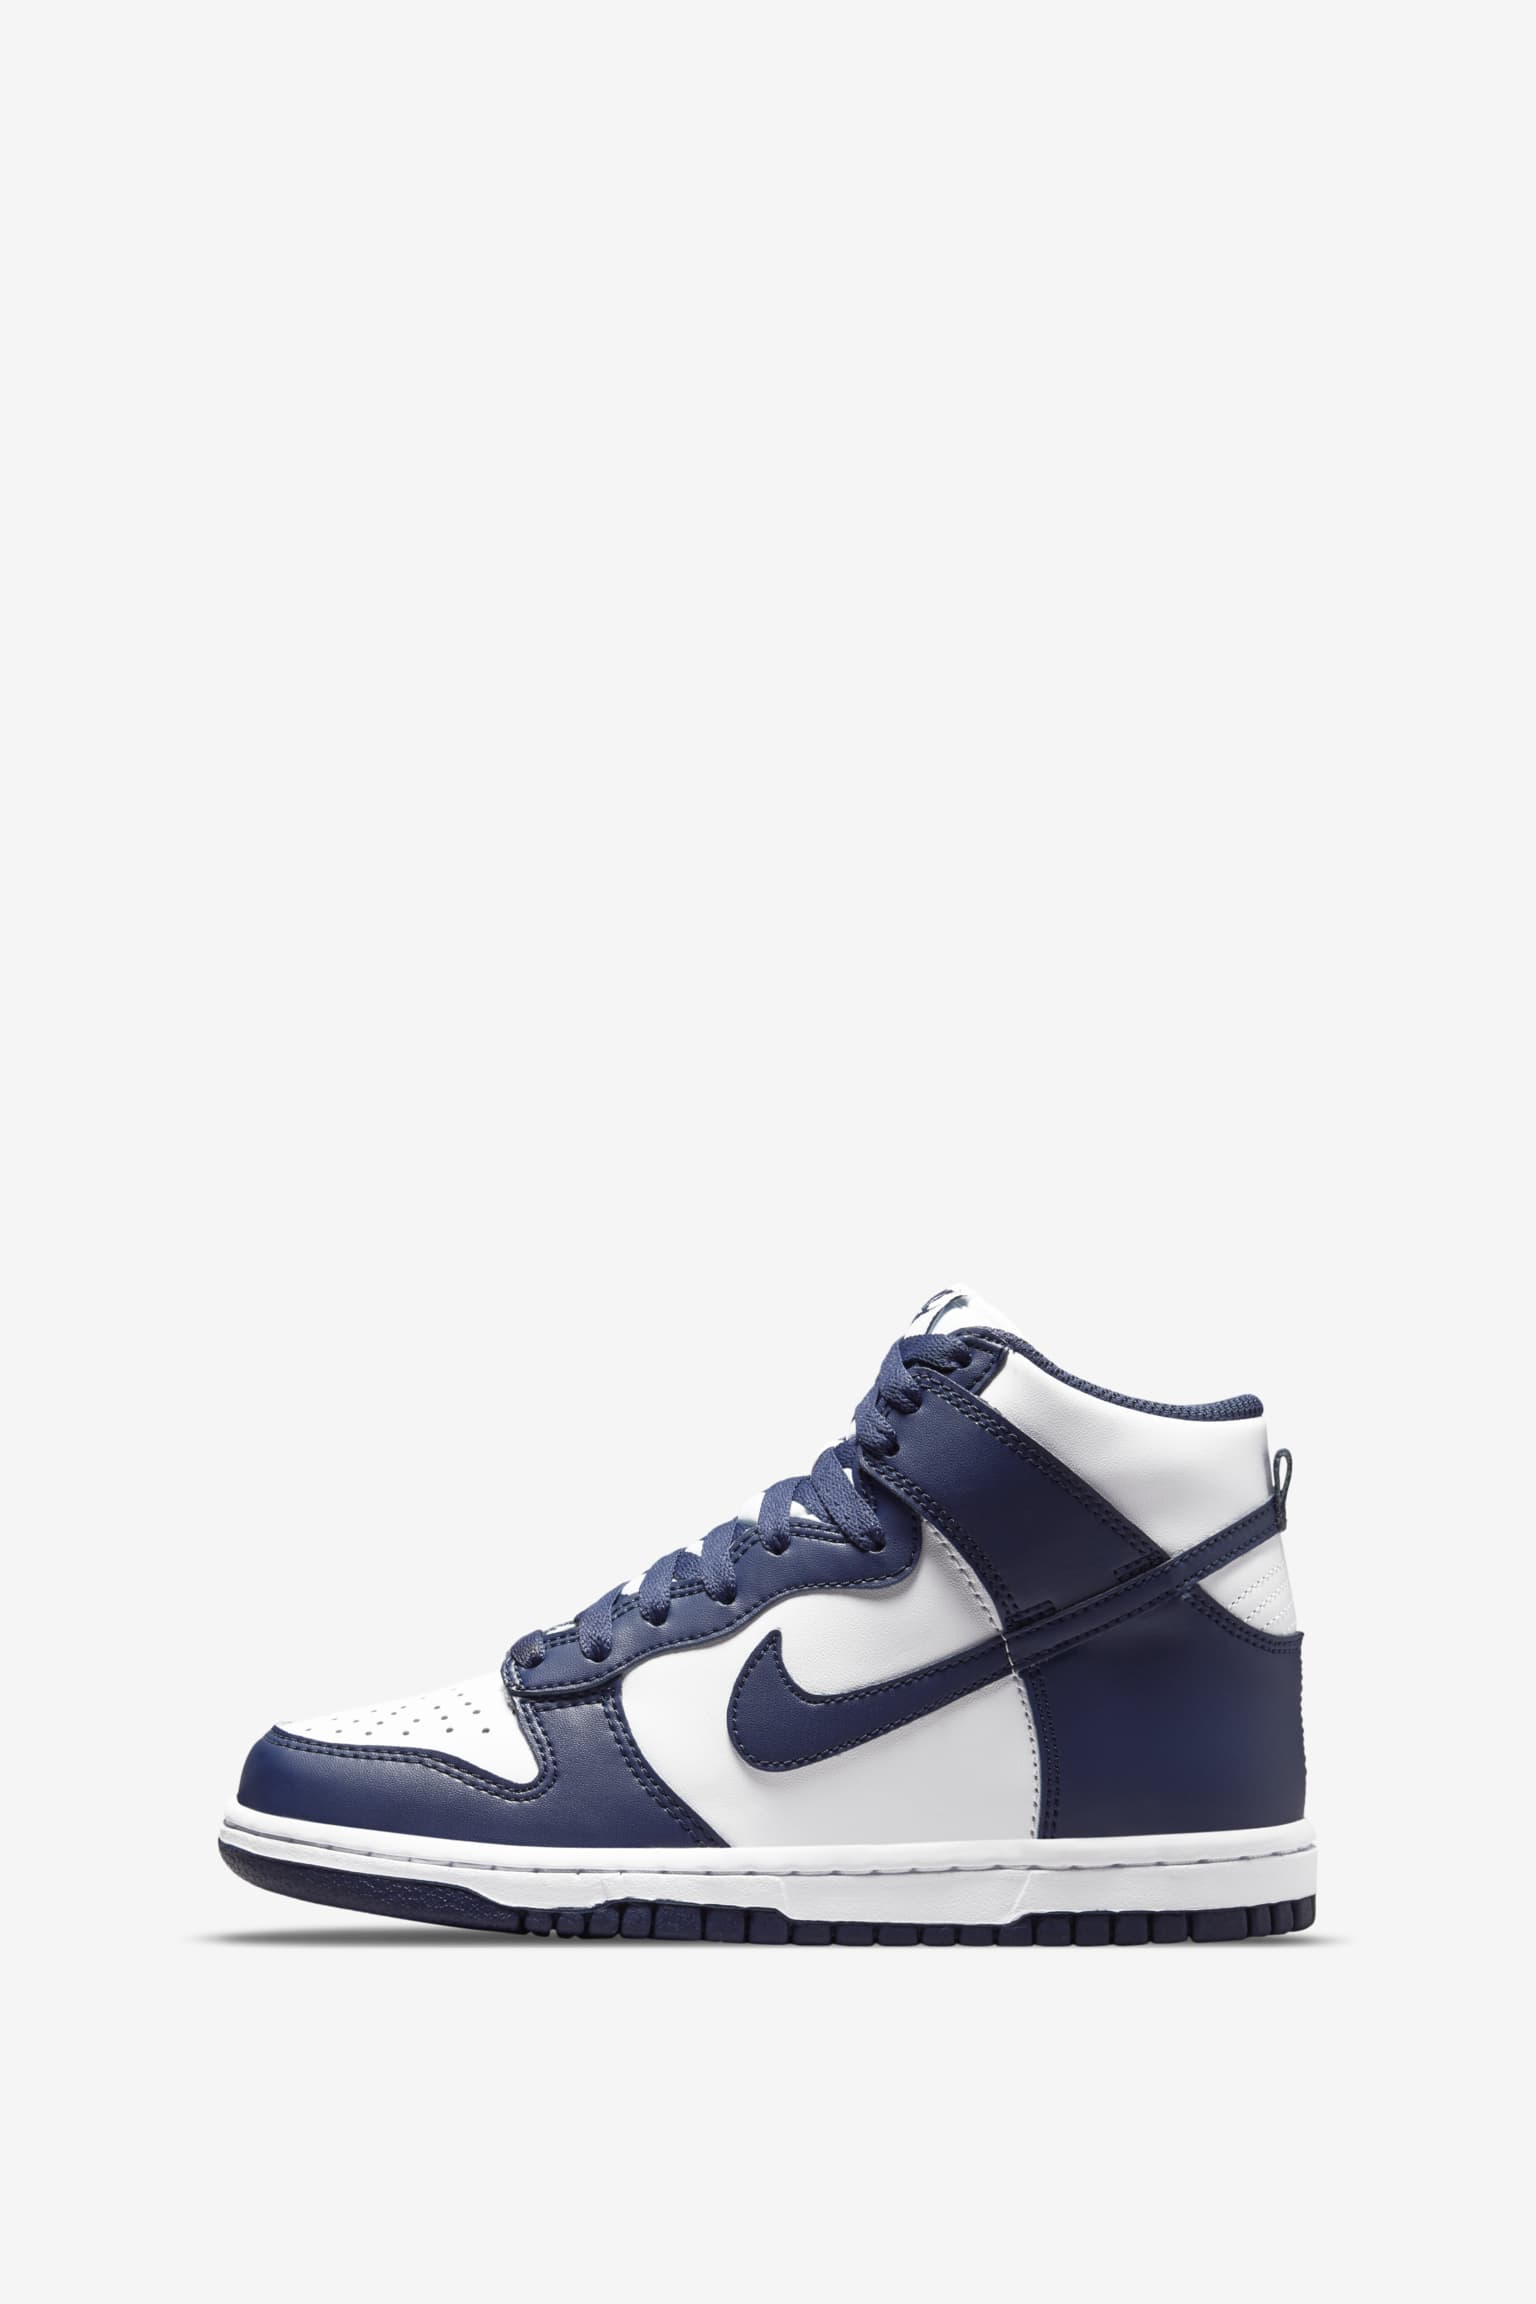 Dunk High 'Championship Navy' Release Date. Nike SNKRS